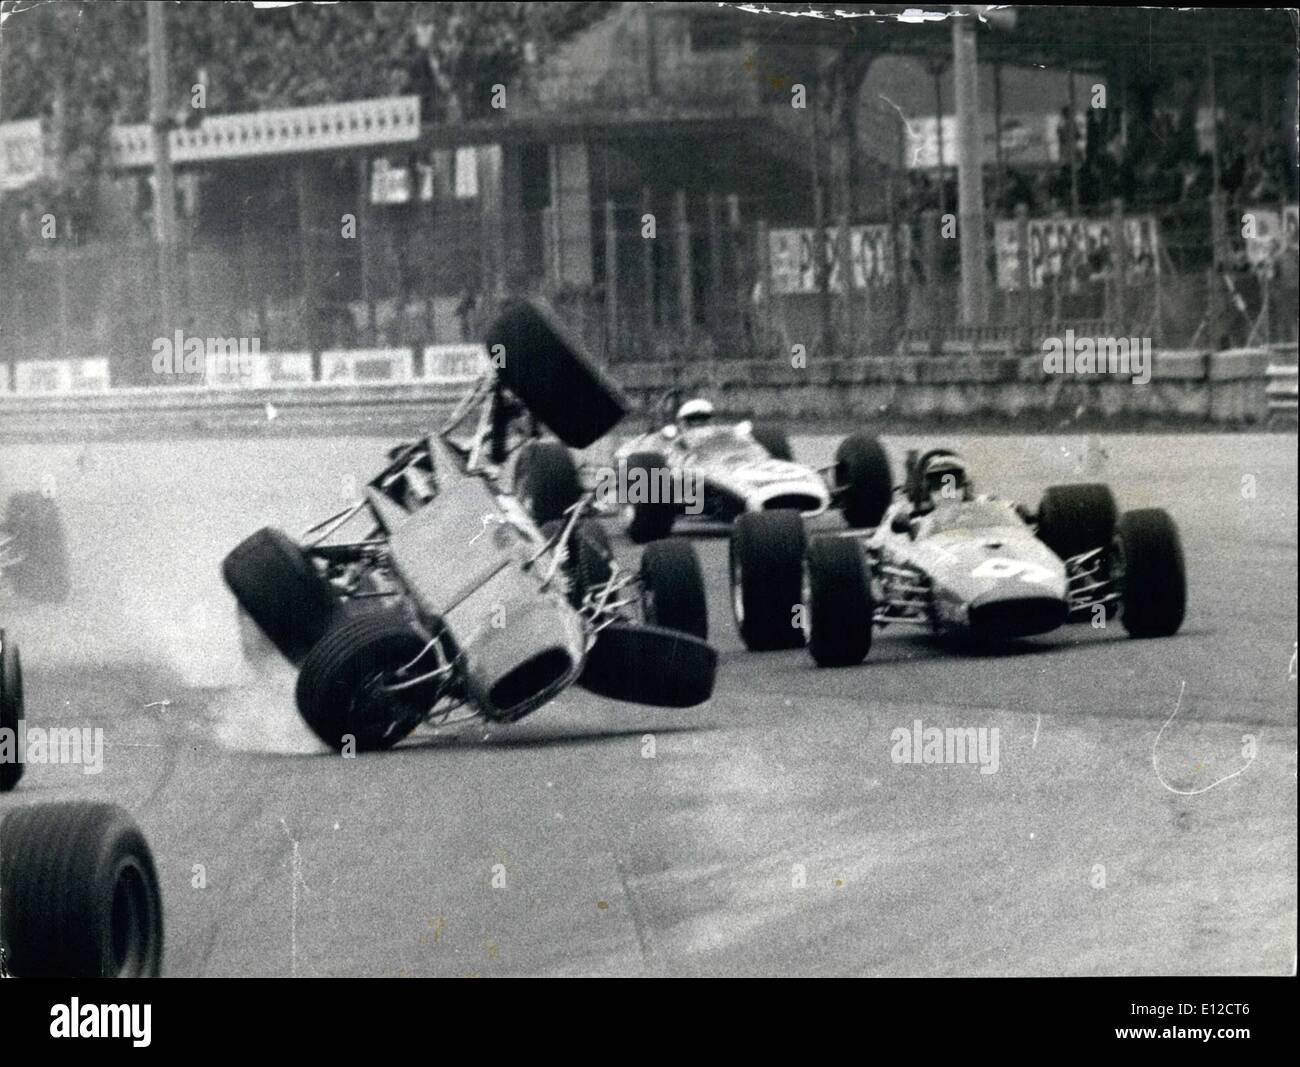 Dec. 16, 2011 - Italian Driver Pino Pica Will not Easily Forget the ''Grand Prix Campagnola'' - a Formula 3 race at Monza, Italy - for in the second heat he had a most amazing escape when his car hurled over another car and landed upside down over the guard rail. Pica was unhurt, but when shown the remains of his car her fainted with shock, and was taken to hospital. Photo Shows:- A Striking Picture as Pica's Car Begins its Fantastic Jump- During the Race at Monza. Stock Photo